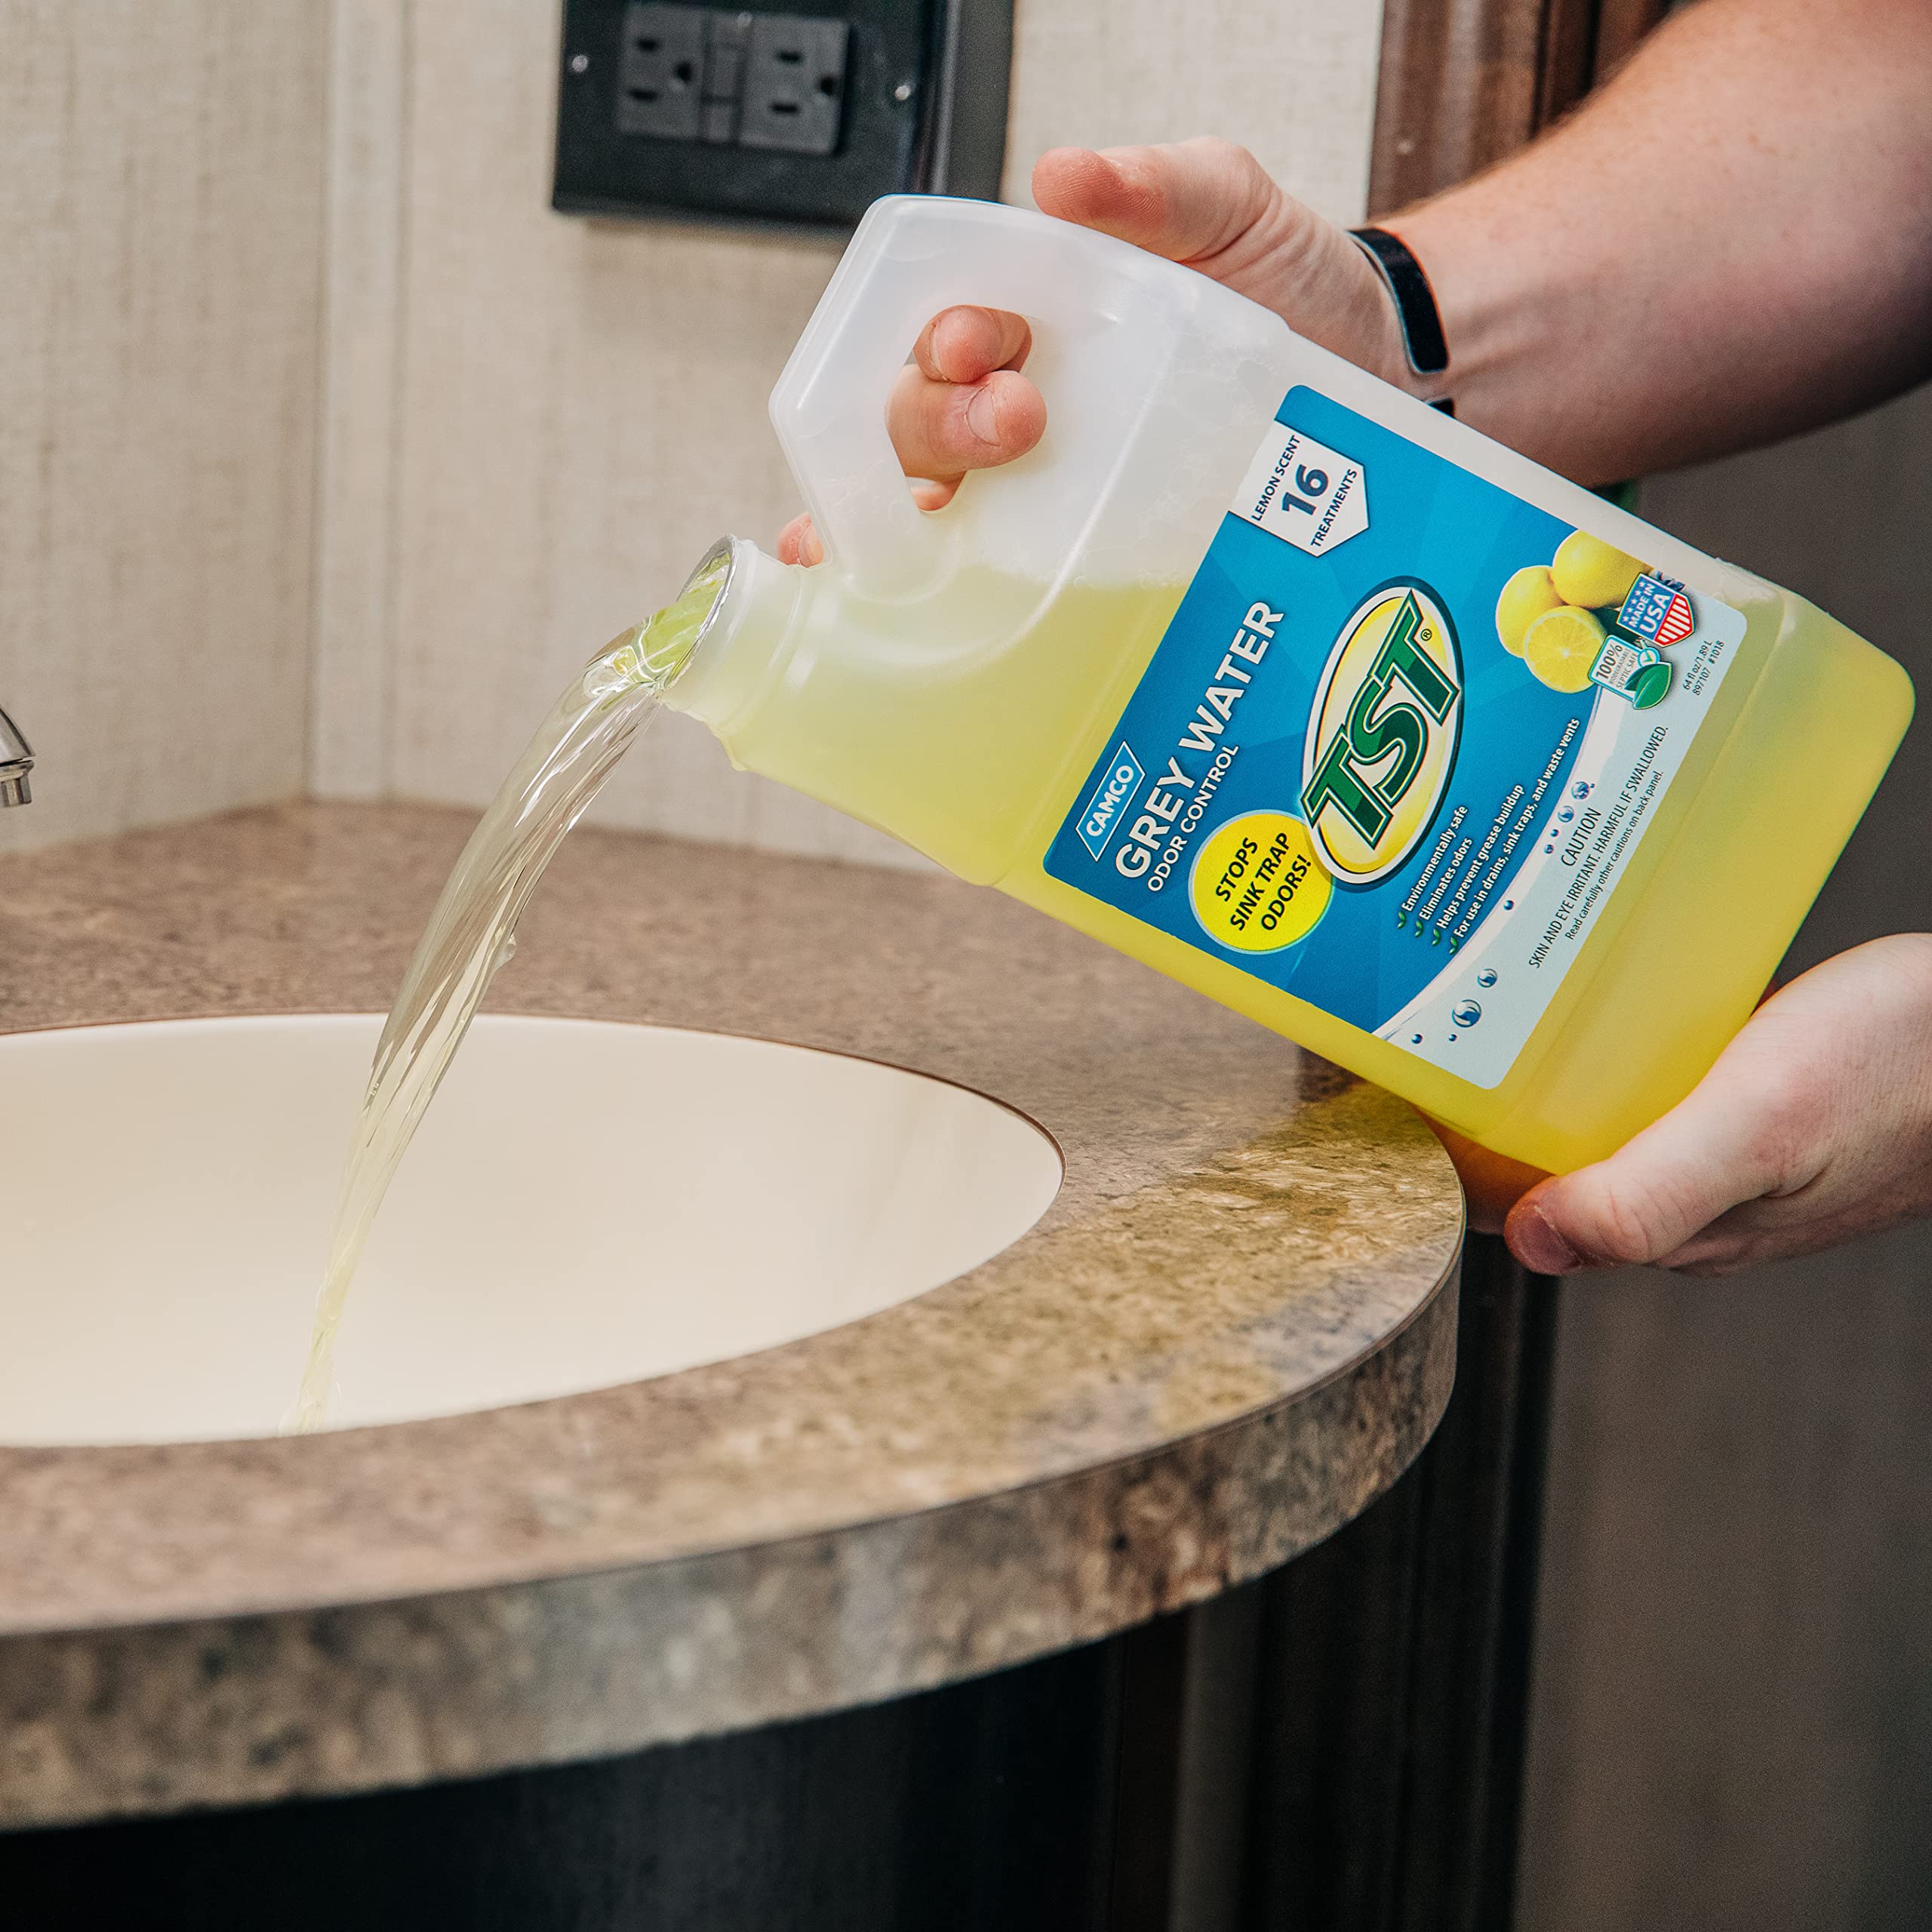 Camco TST Lemon Scent RV Grey Water Odor Control, Stops Sink Trap Odors, For Use In Drains, Sink Traps and Waste Vents, Treats up to 16 - 40 Gallon Holding Tanks (64 Ounce Bottle)